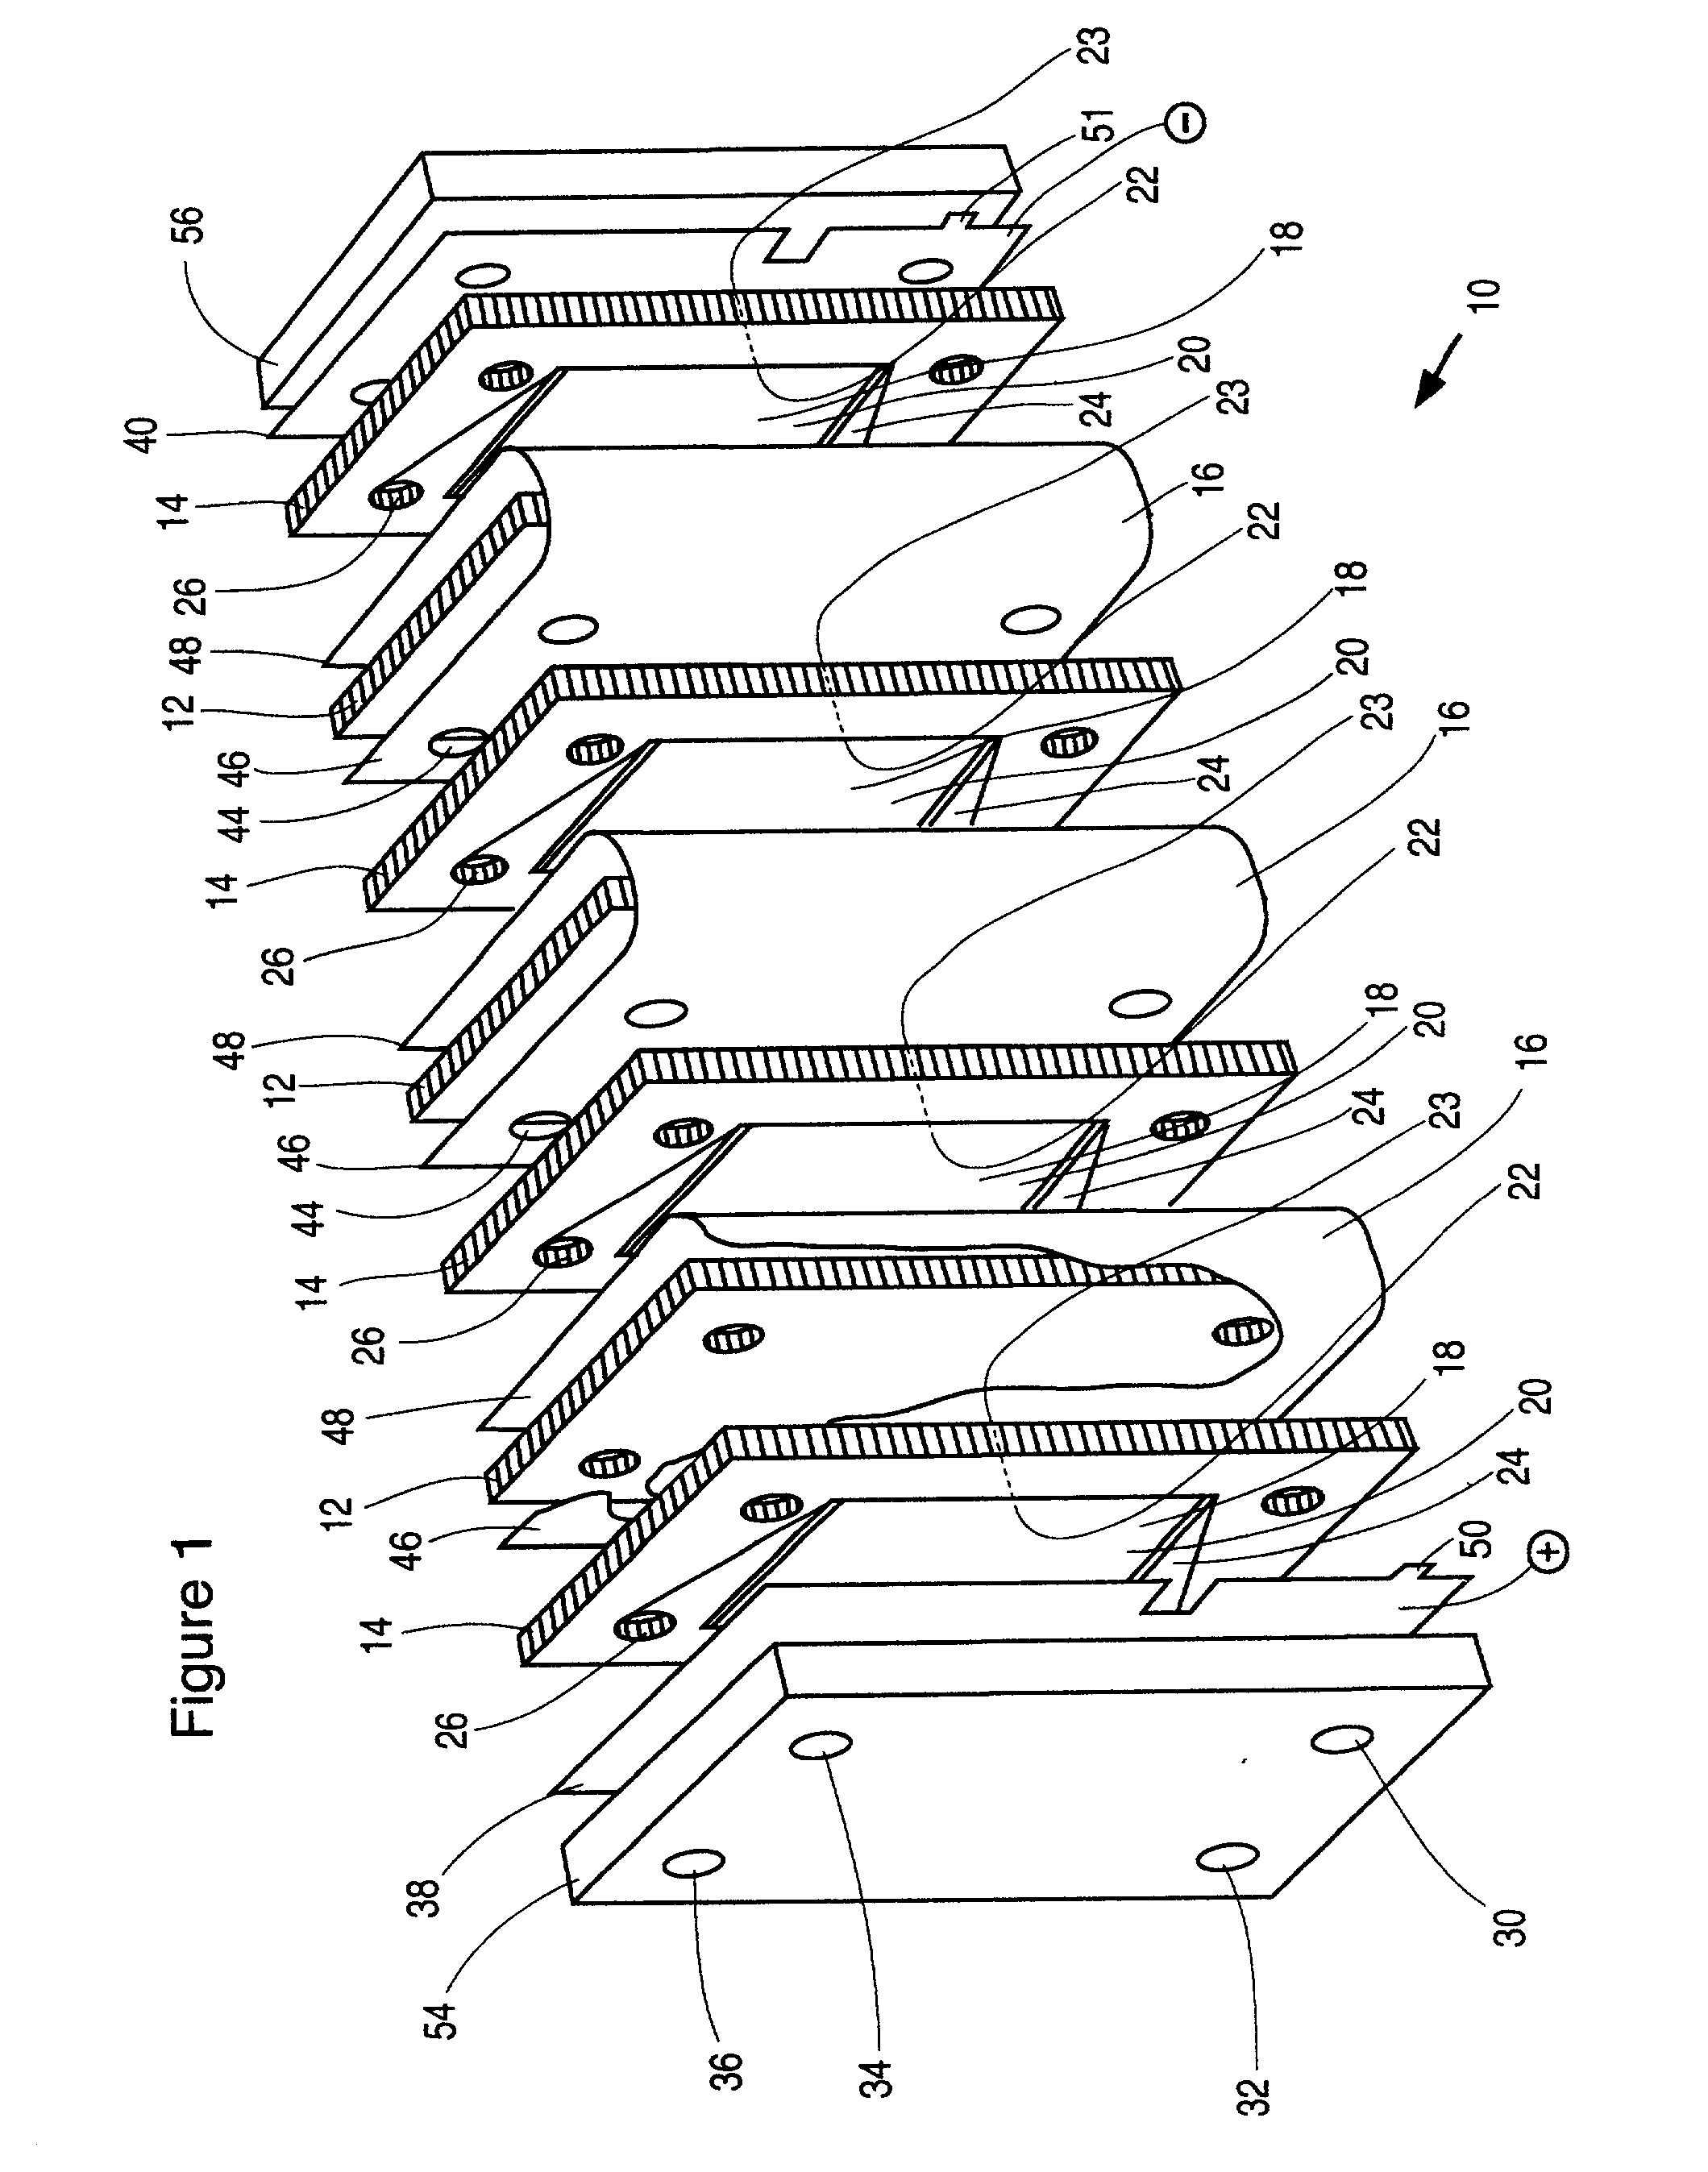 Electrochemical cell stacks